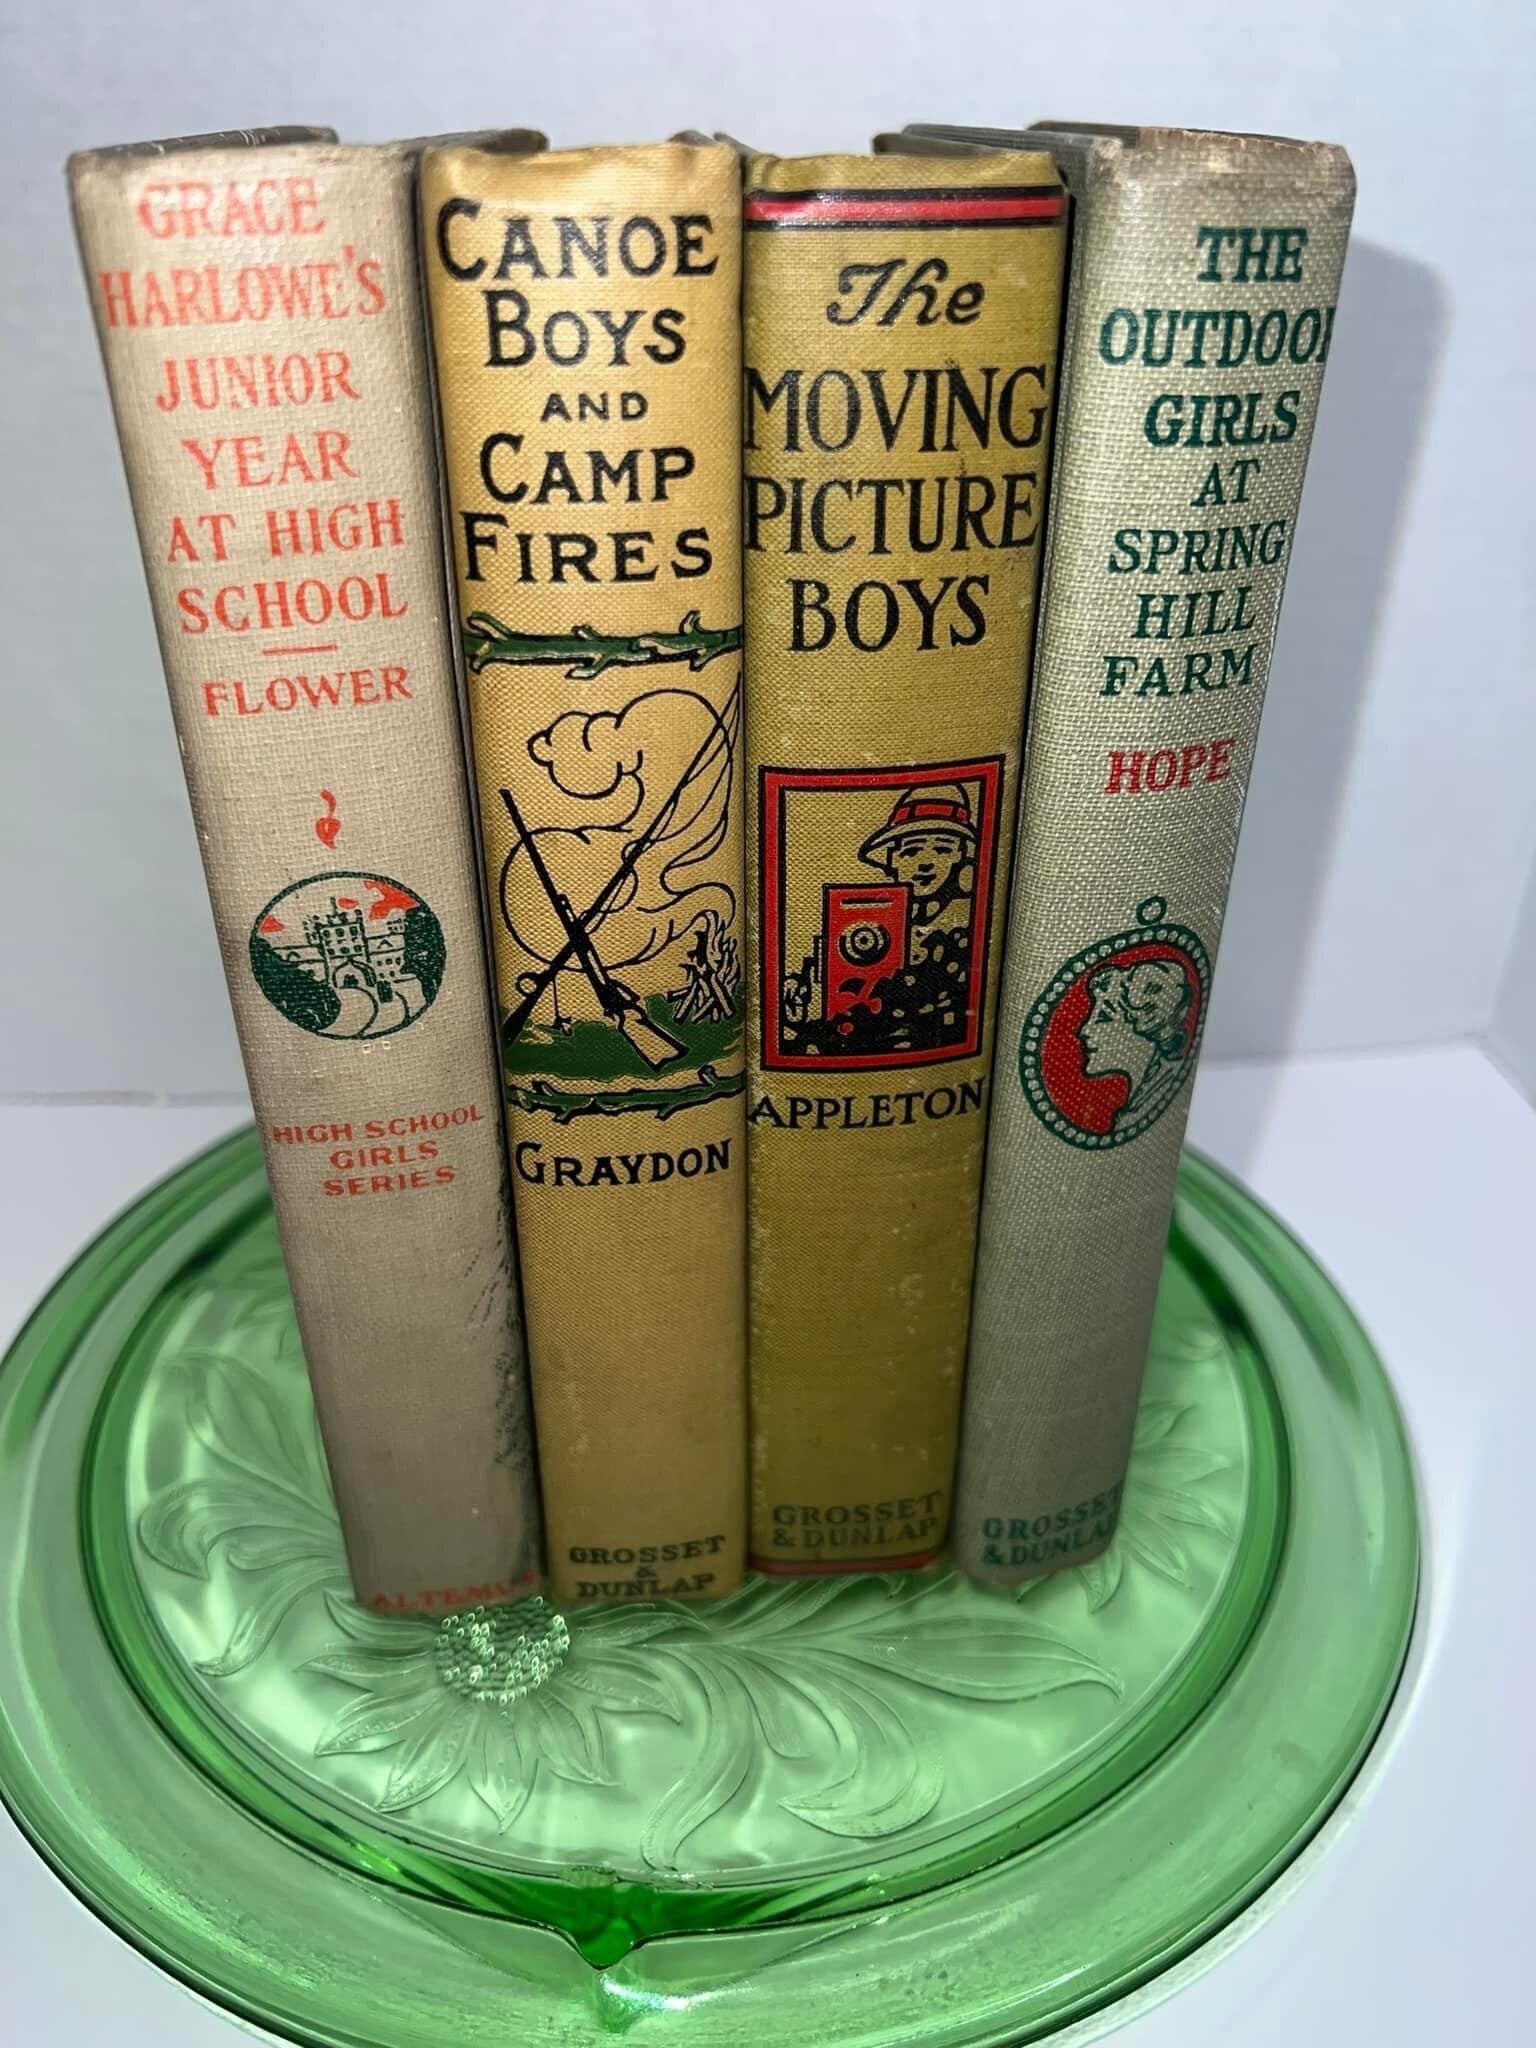 Antique 4 decorated cover young reader books 1912-1920s Outdoor girls , moving picture boys , canoe boys , junior year at high school